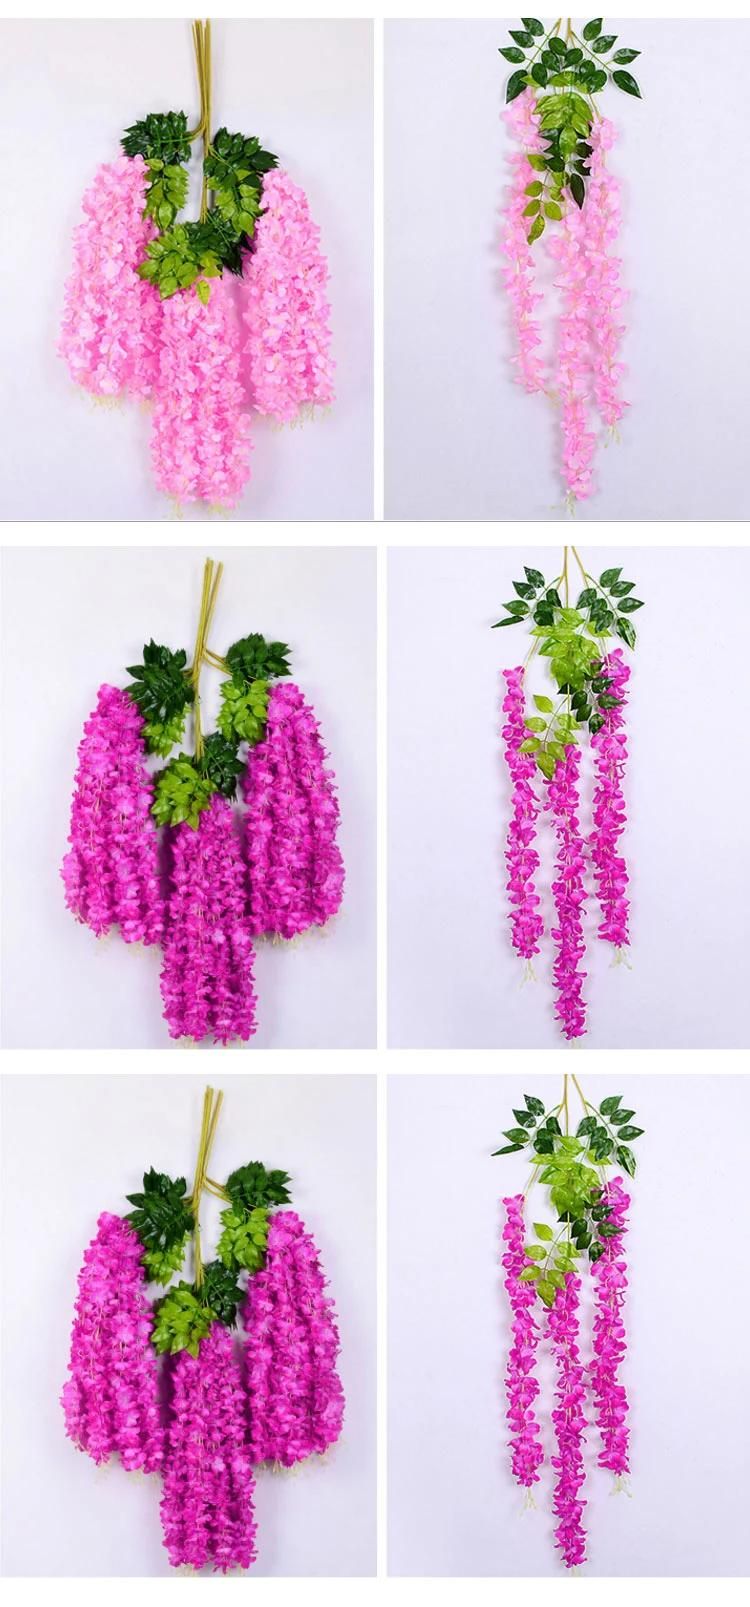 12 Pieces Wisteria Artificial Flower 45 Inch Bushy Silk Vine Ratta Hanging Garland Hanging for Wedding Party Garden Outdoor Greenery Office Wall Decoration